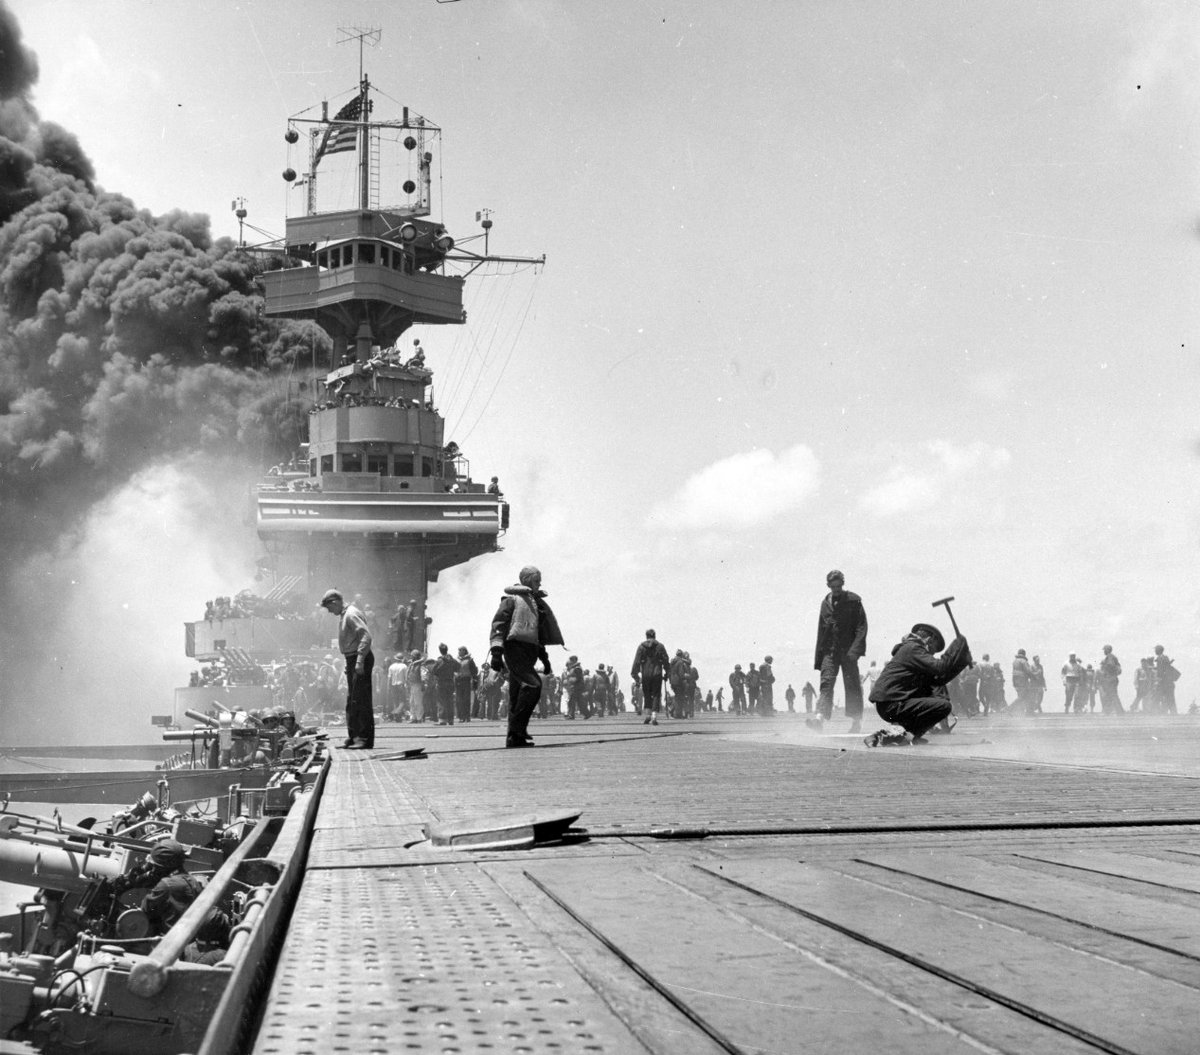  #MemorialDay WWII U.S. Navy ill prepared in terms of ships, and much of that devastated atPearl Habor. By the grace of God our carrier fleet was at sea, spared, and proved naval air power by sinking four enemy carriers at Midway.62,614 Navy sailors & officers lost in WWII.